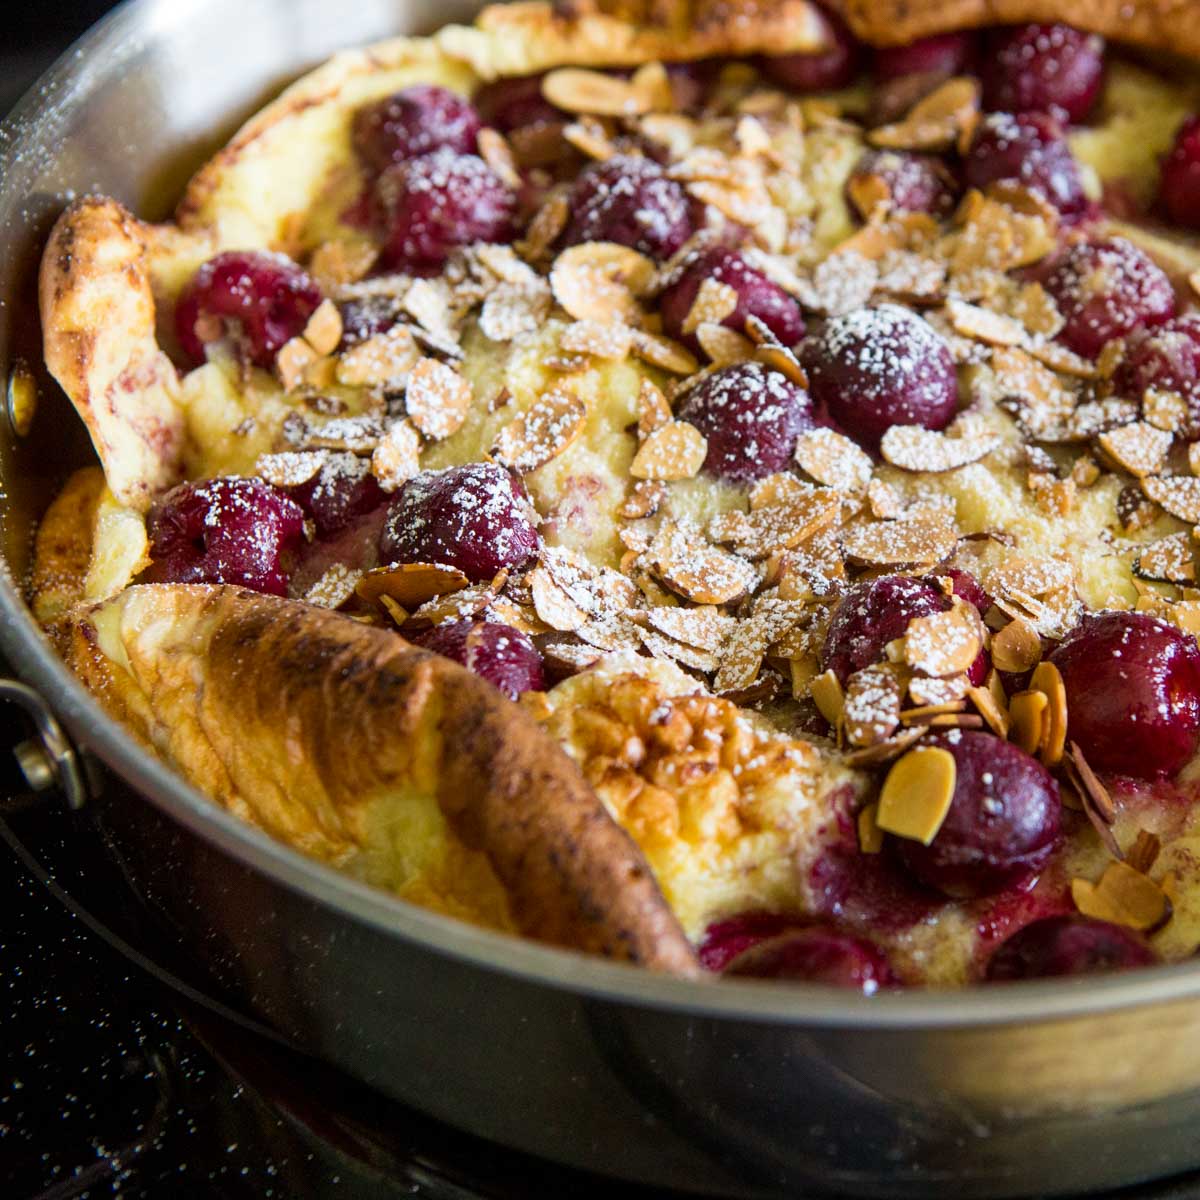 The baked cherry clafouti is in the skillet.